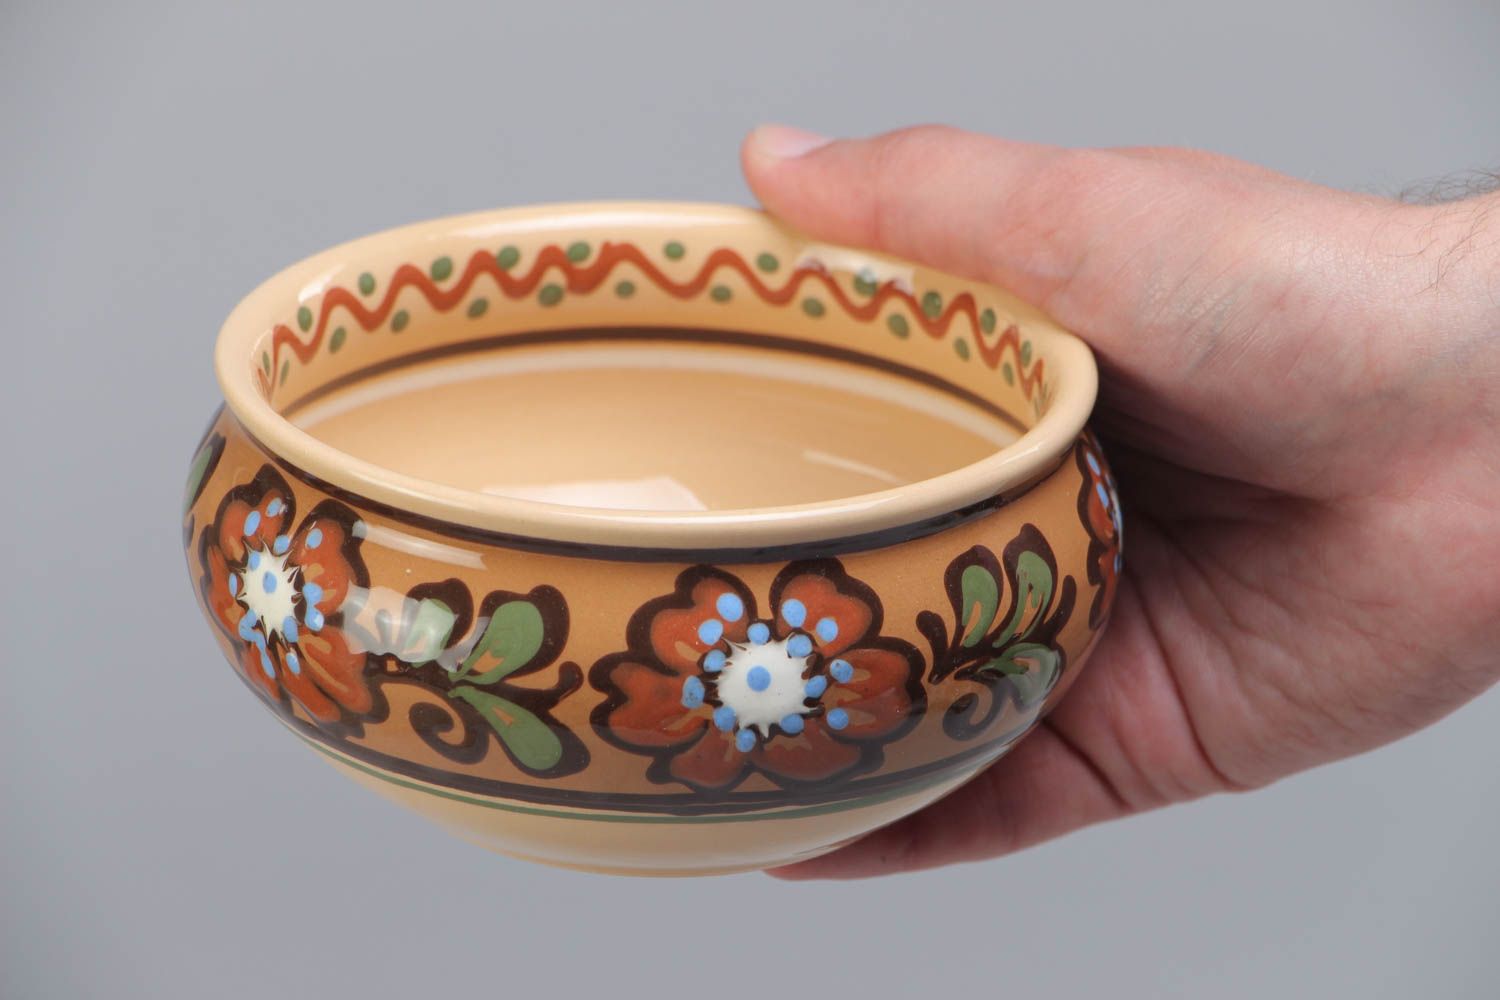 Homemade decorative ceramic deep bowl painted with colorful glaze 300 ml photo 5